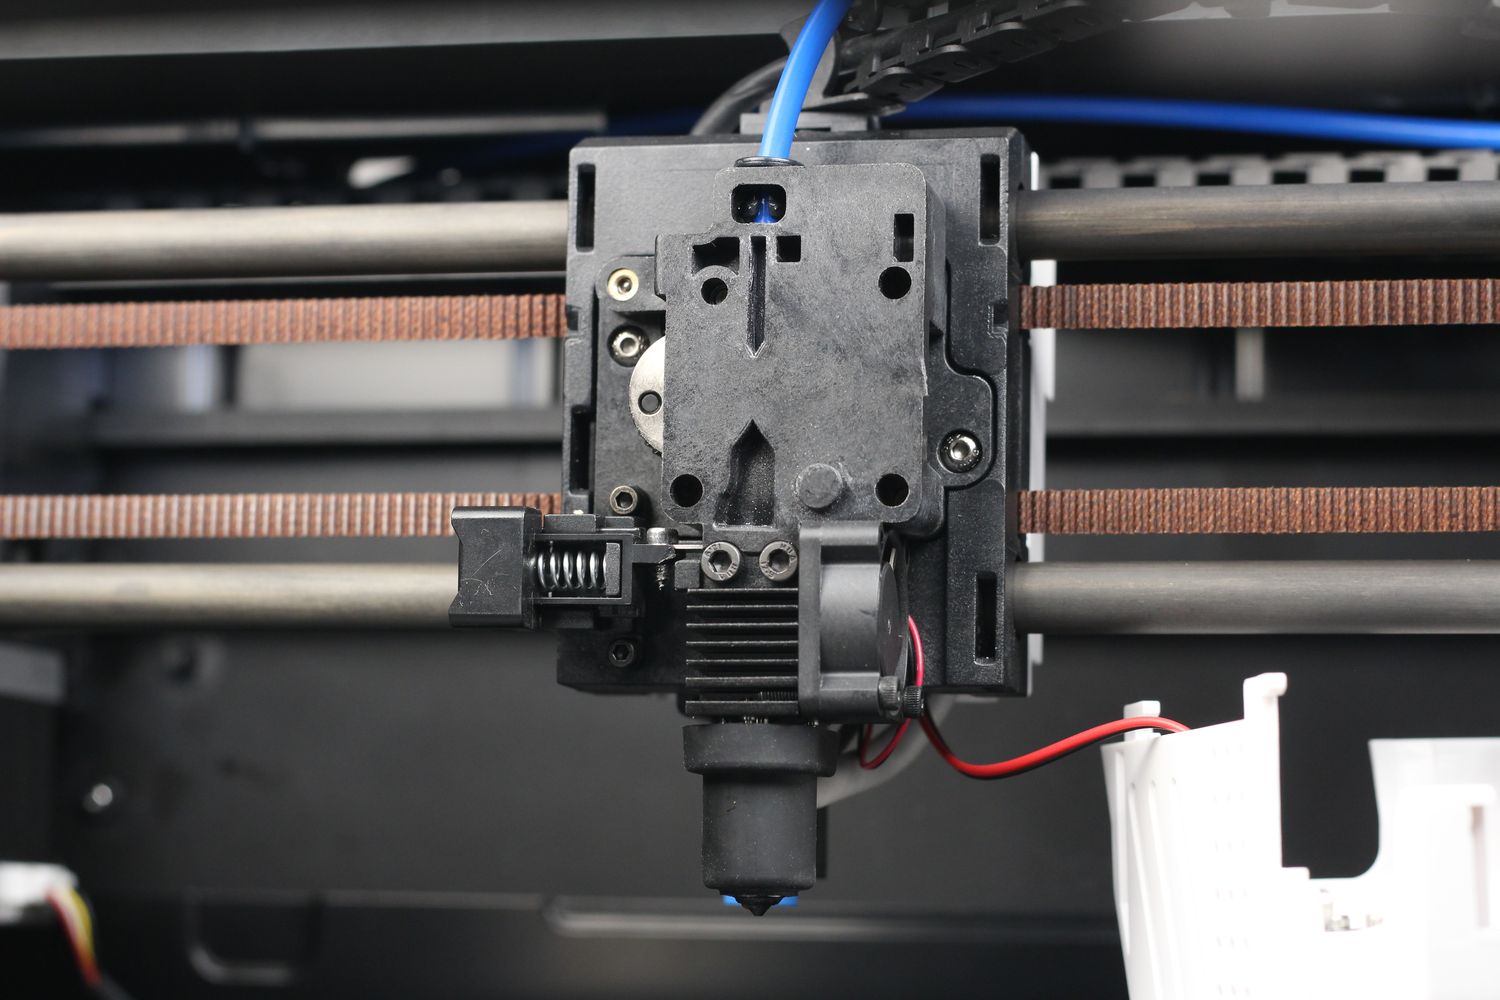 QIDI X Plus 3 Extruder and board2 | 3D Printing Summer of 2023: Attack of the Core XYs